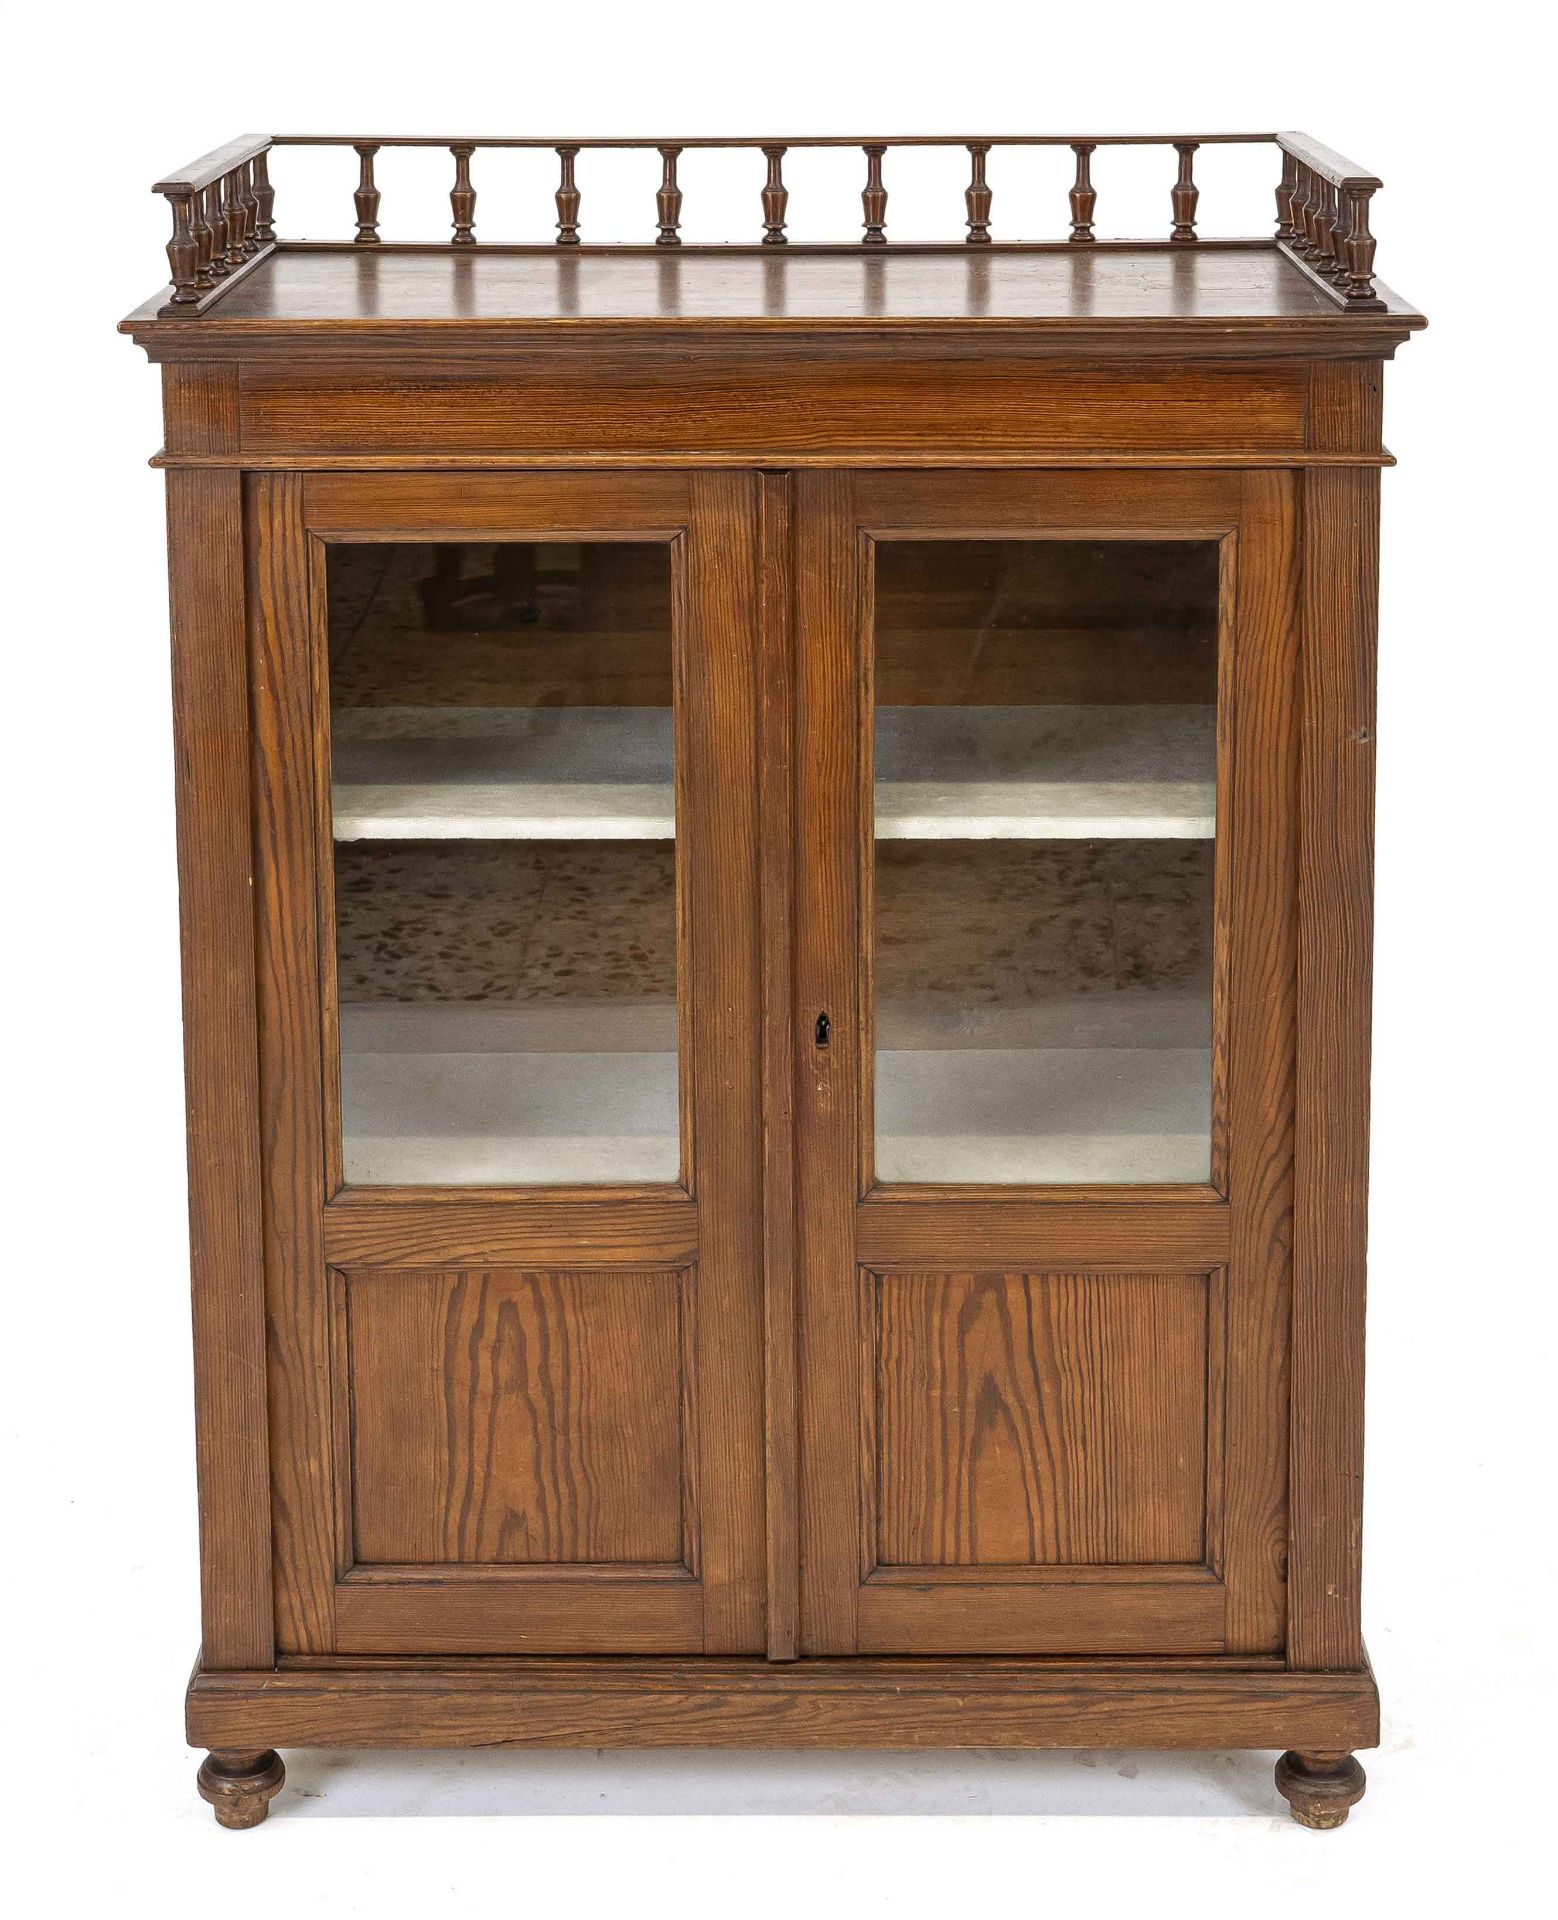 Small glass cabinet, c. 1900, softwood, 2-door body, gallery running around the top, 110 x 74 x 33